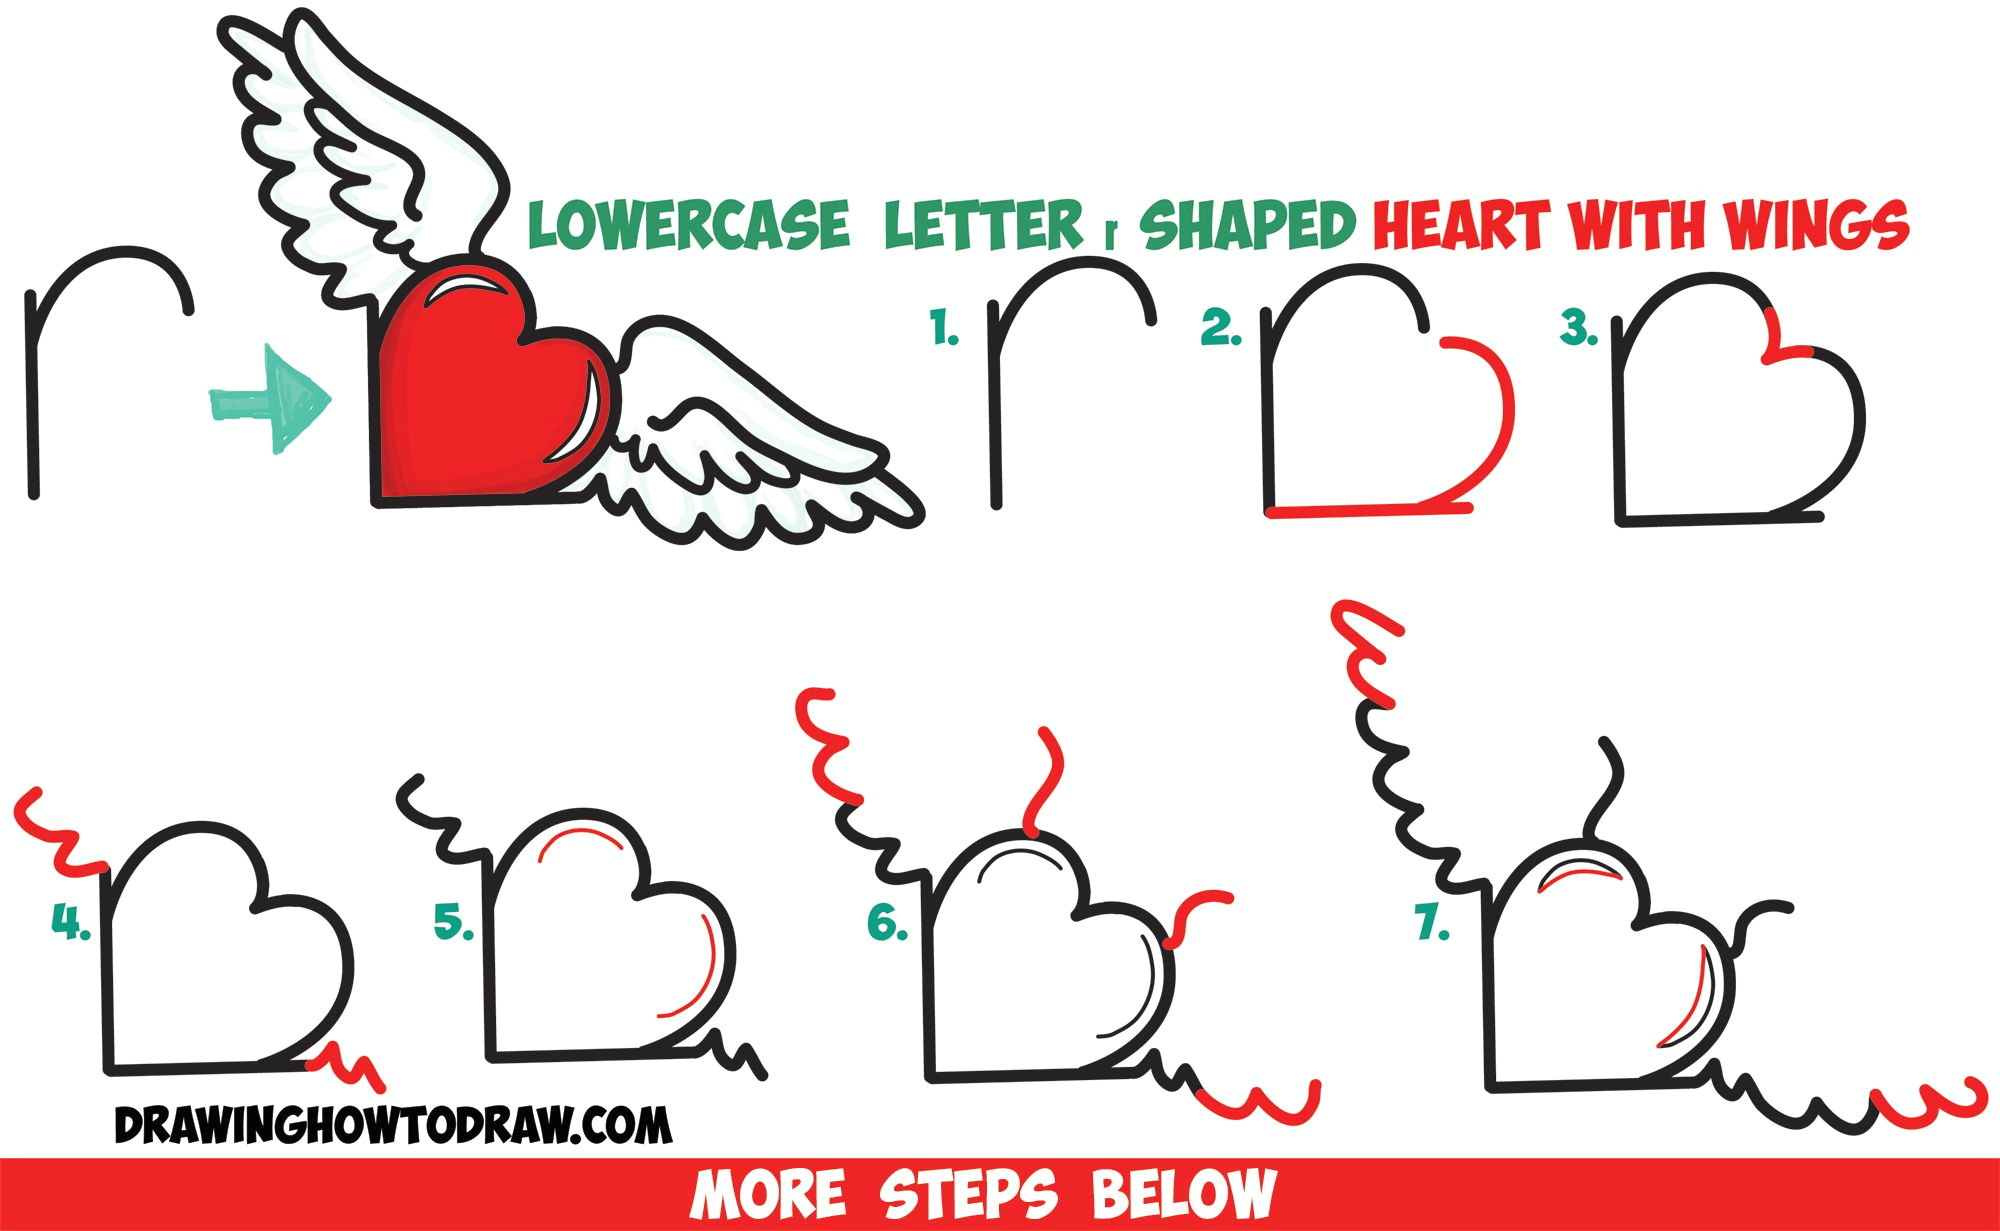 Drawing Of A Heart Shape How to Draw Heart with Wings From Lowercase Letter R Shapes Easy